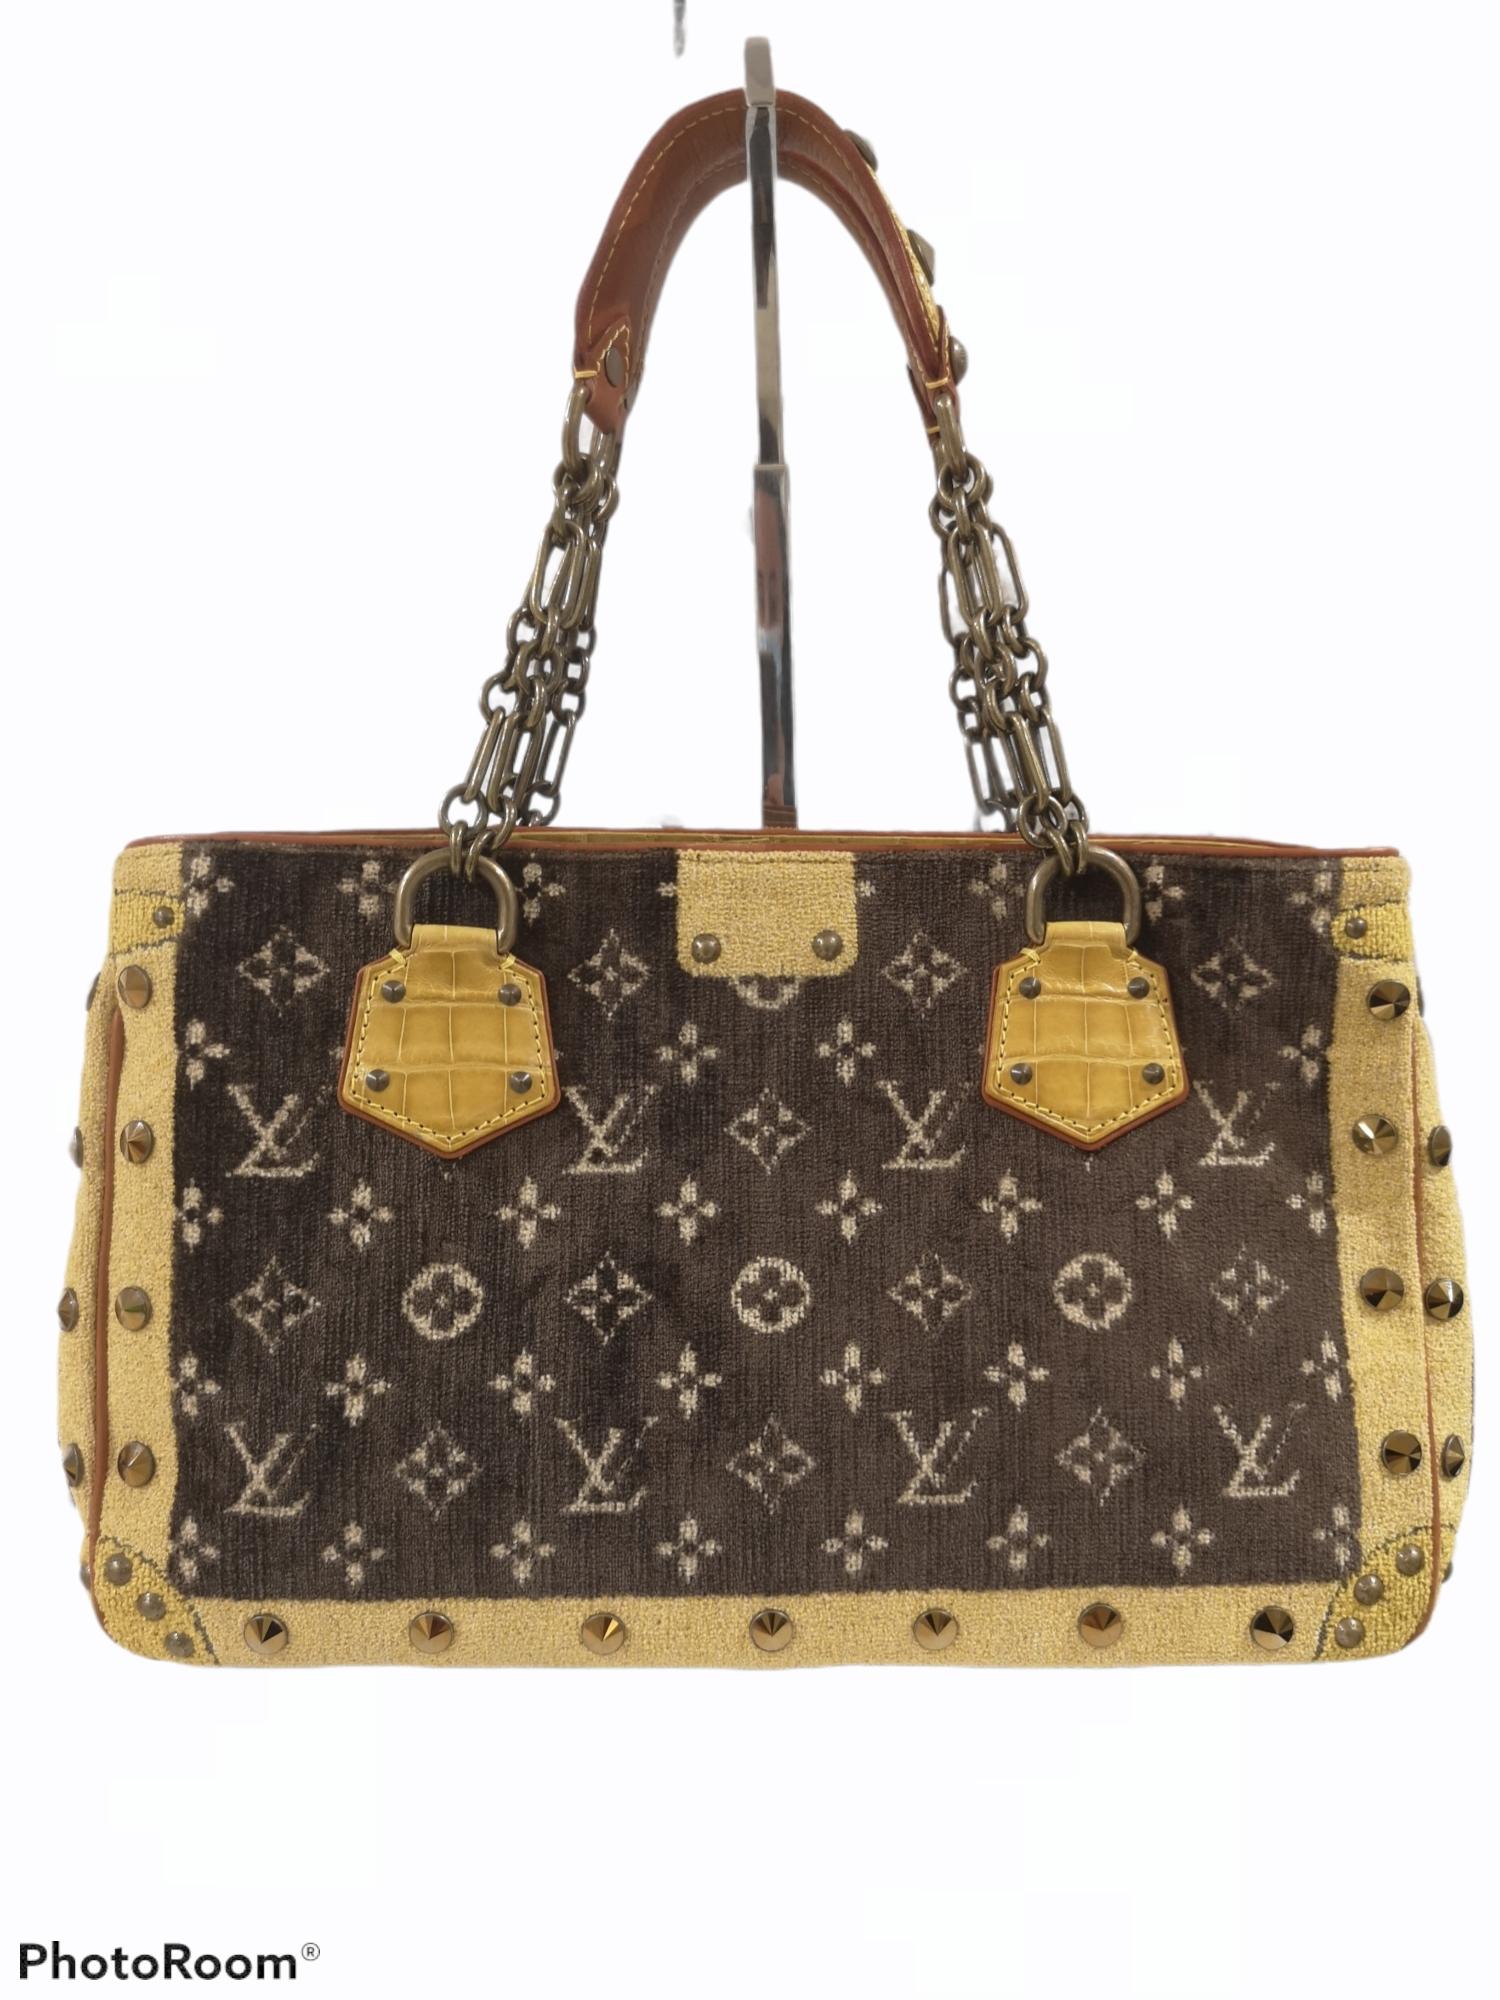 Louis Vuitton 2004 limited edition 